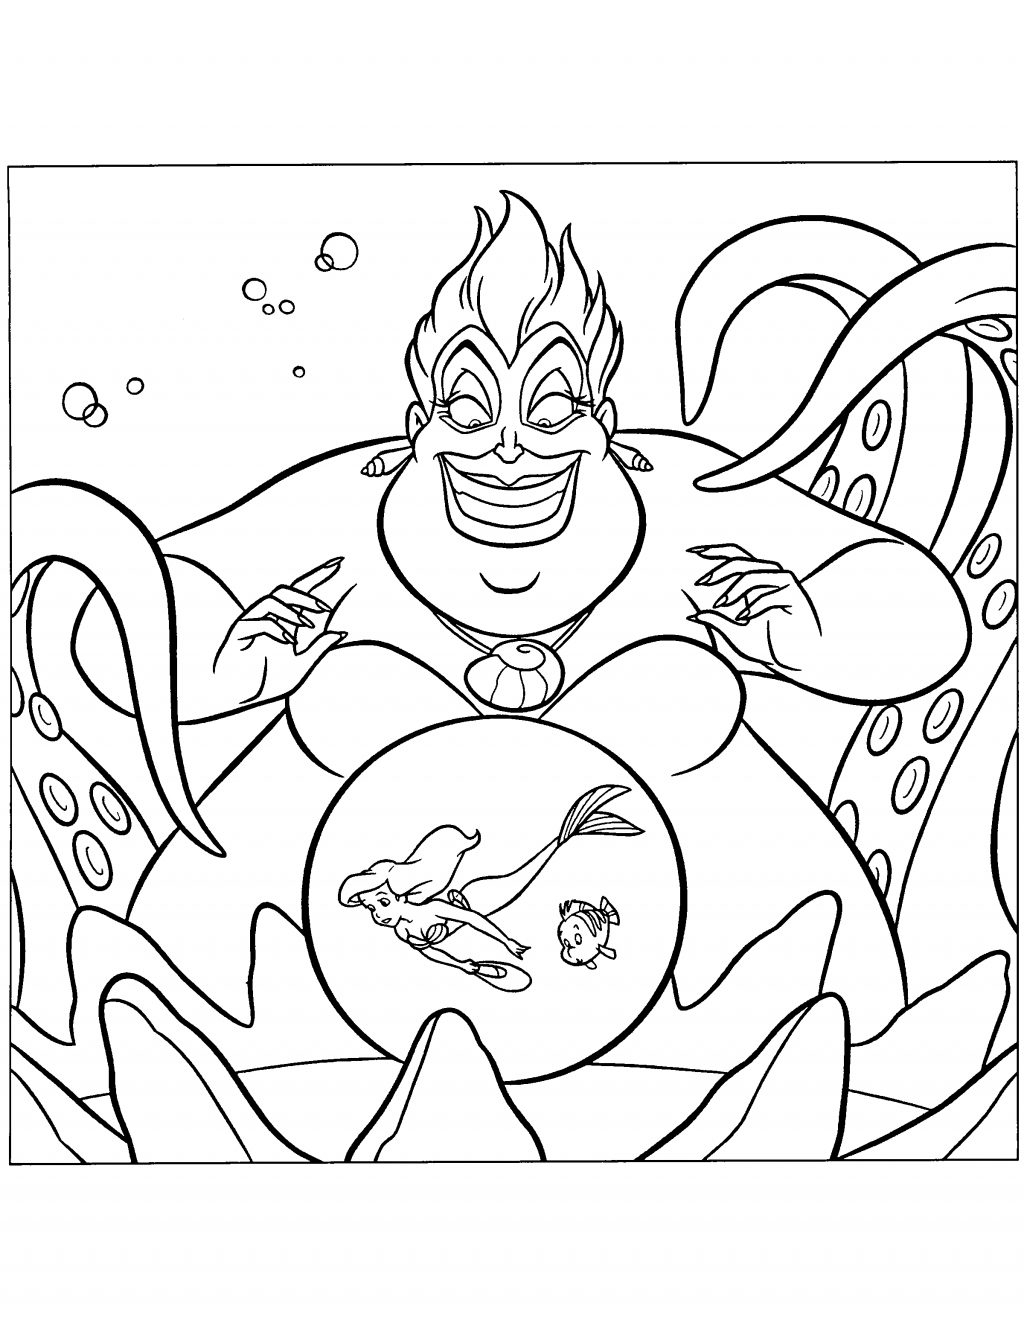 Coloring Pages Of Little Mermaid Coloring Page Incredible Ariel Mermaid Coloring Pages Image Ideas